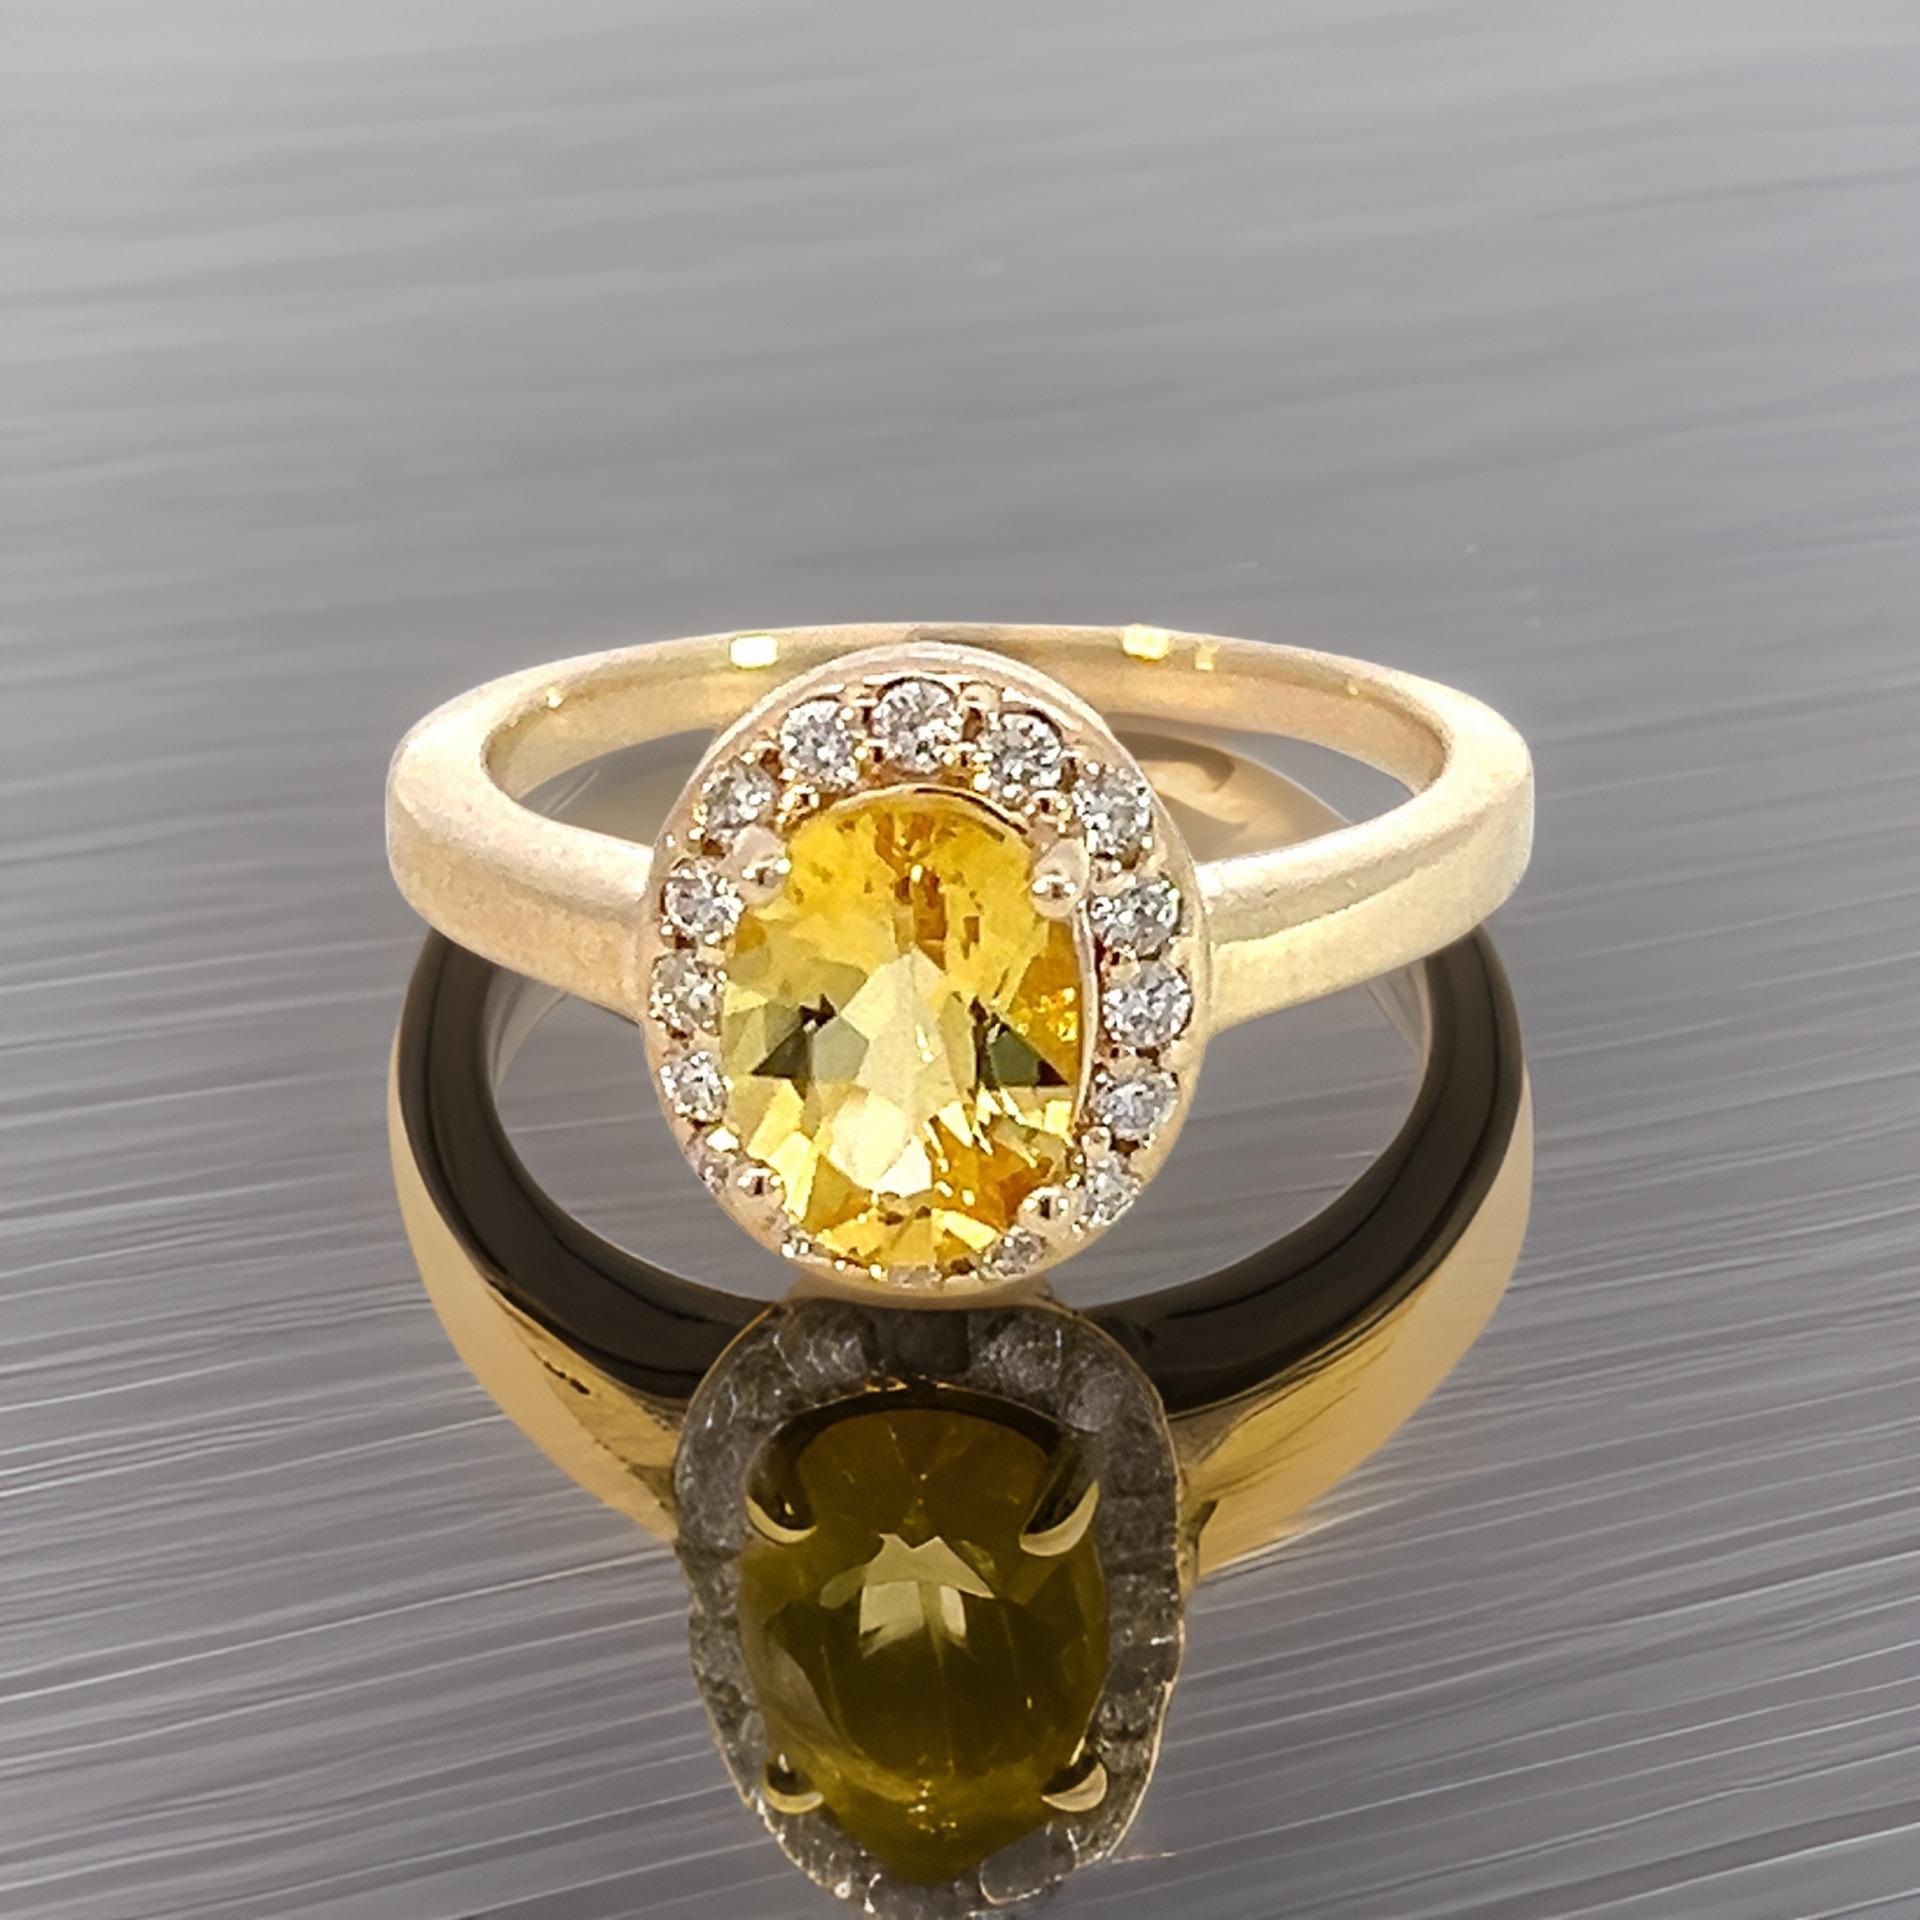 Oval Cut Natural Citrine Diamond Ring 6.5 14k Yellow Gold 1.74 TCW Certified For Sale